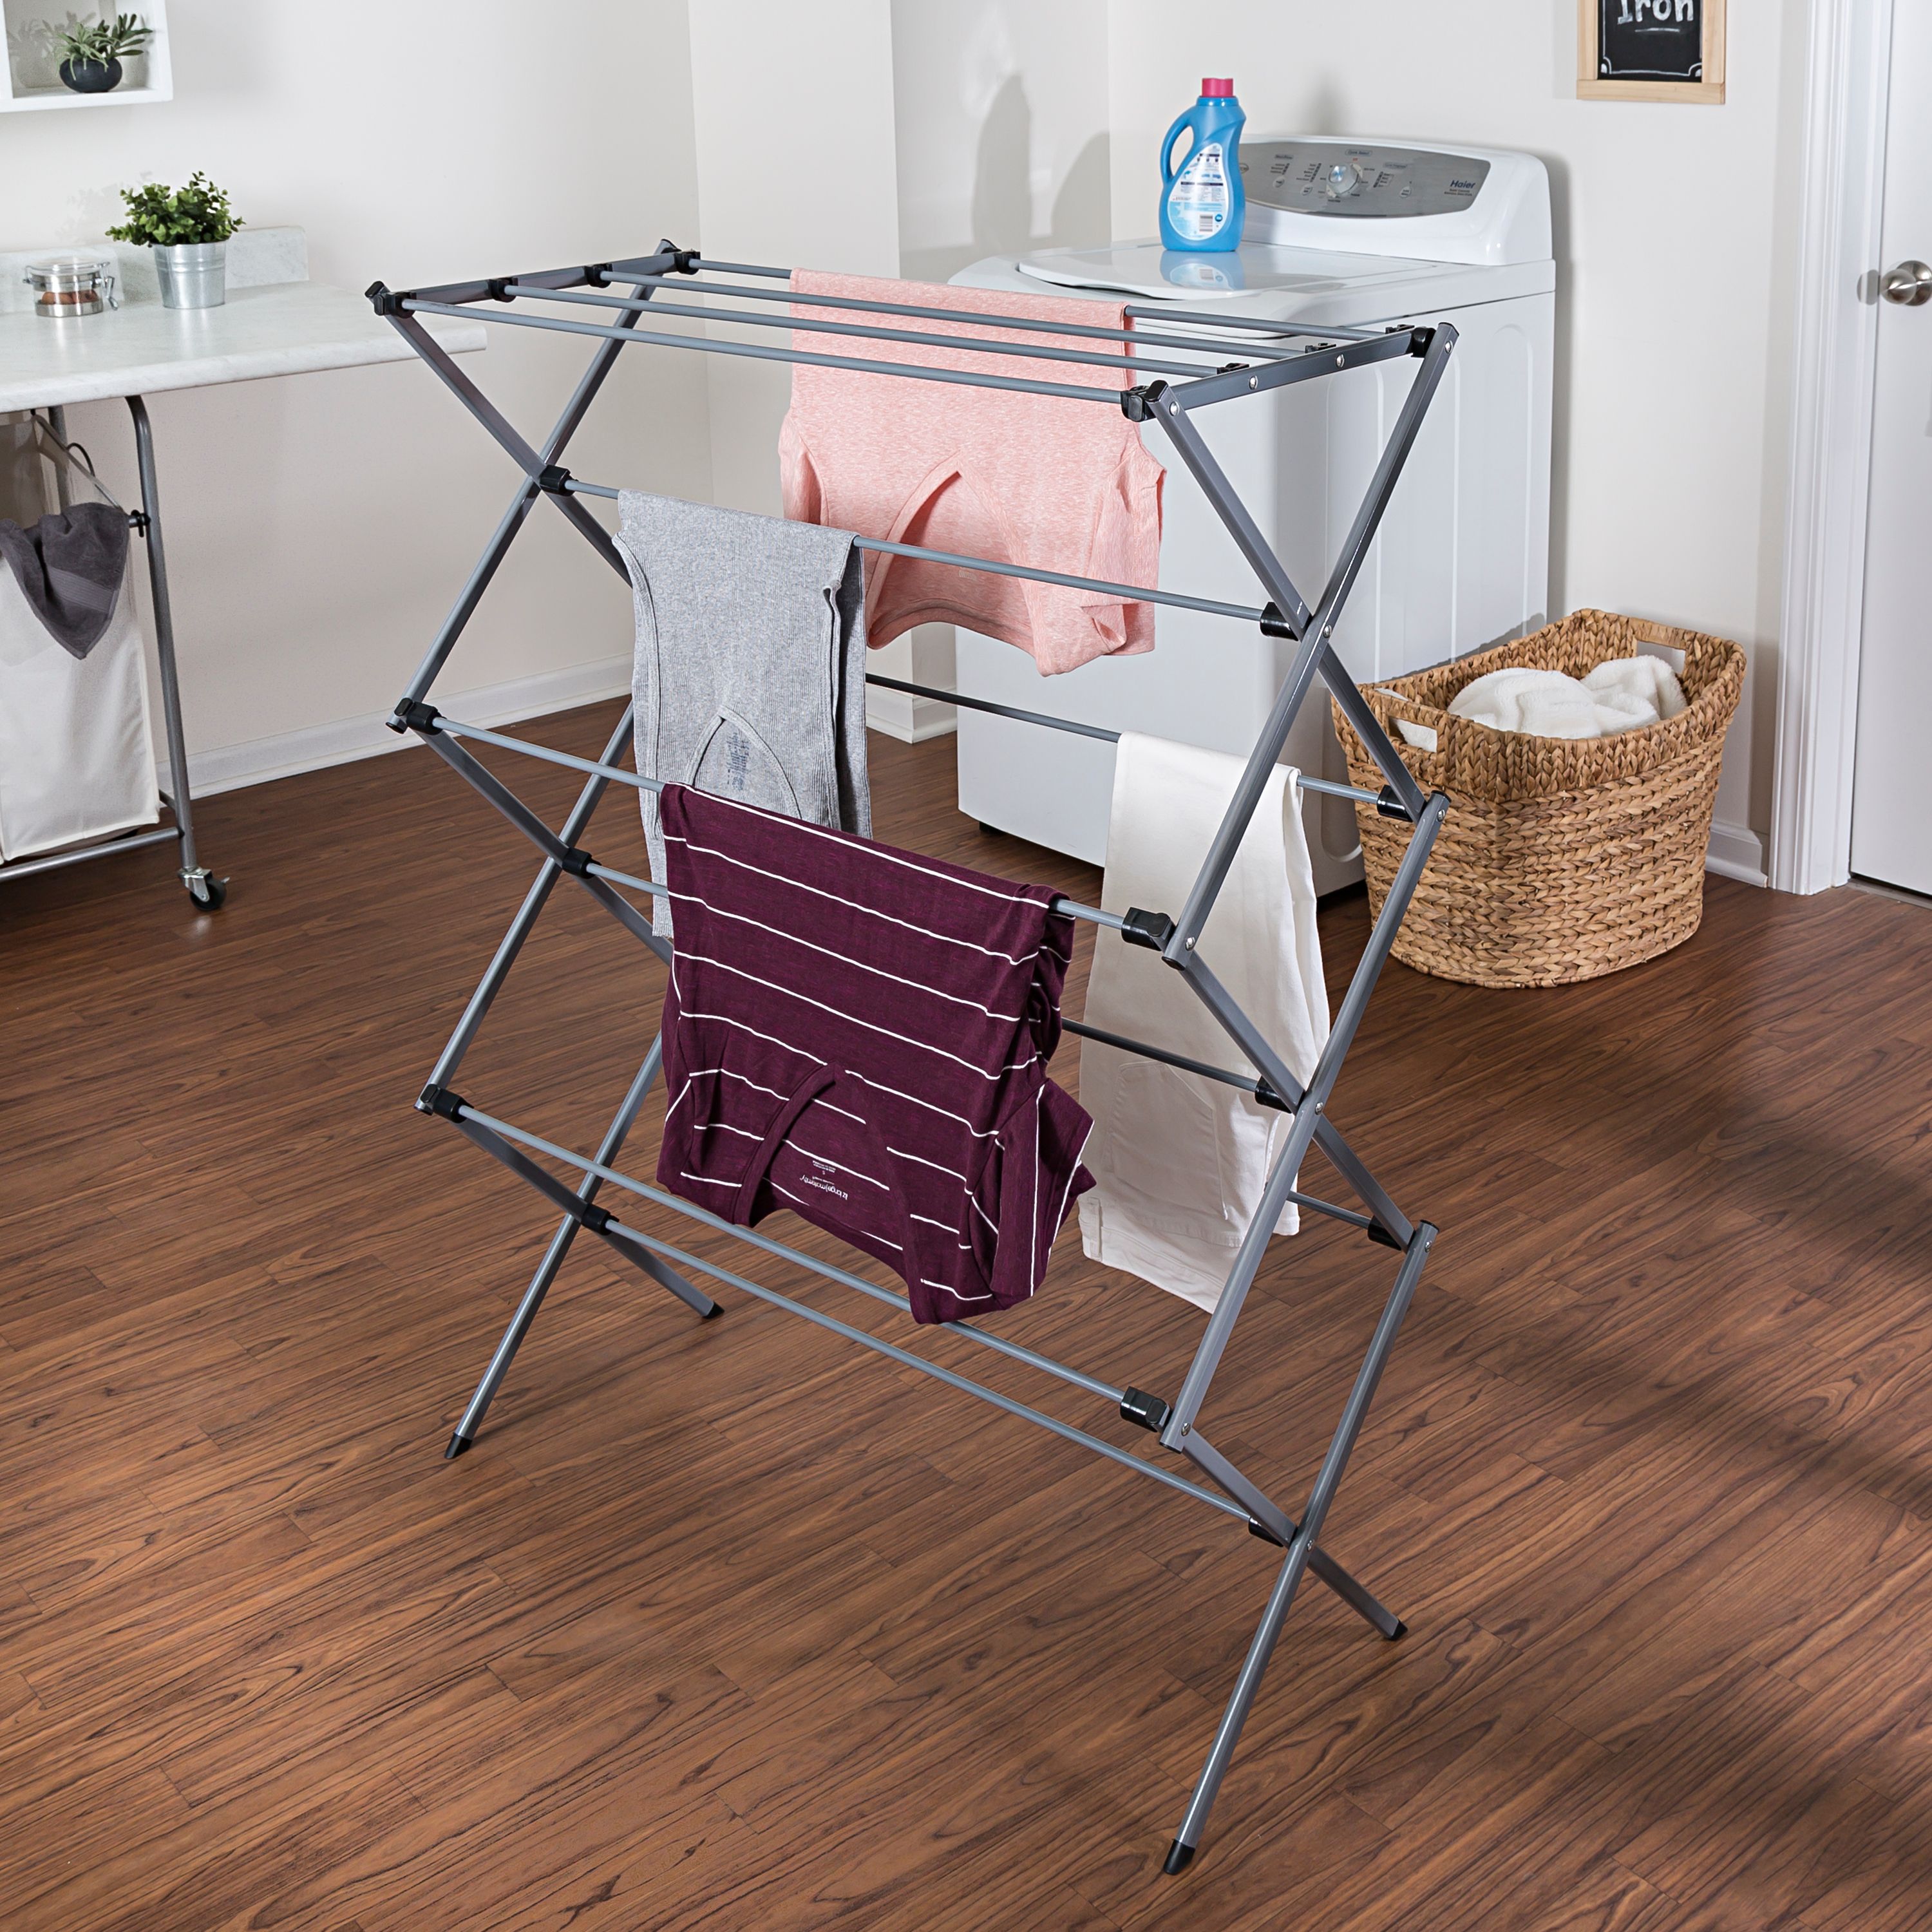 Honey-Can-Do Folding Metal Clothes Drying Rack, Gray - image 4 of 9